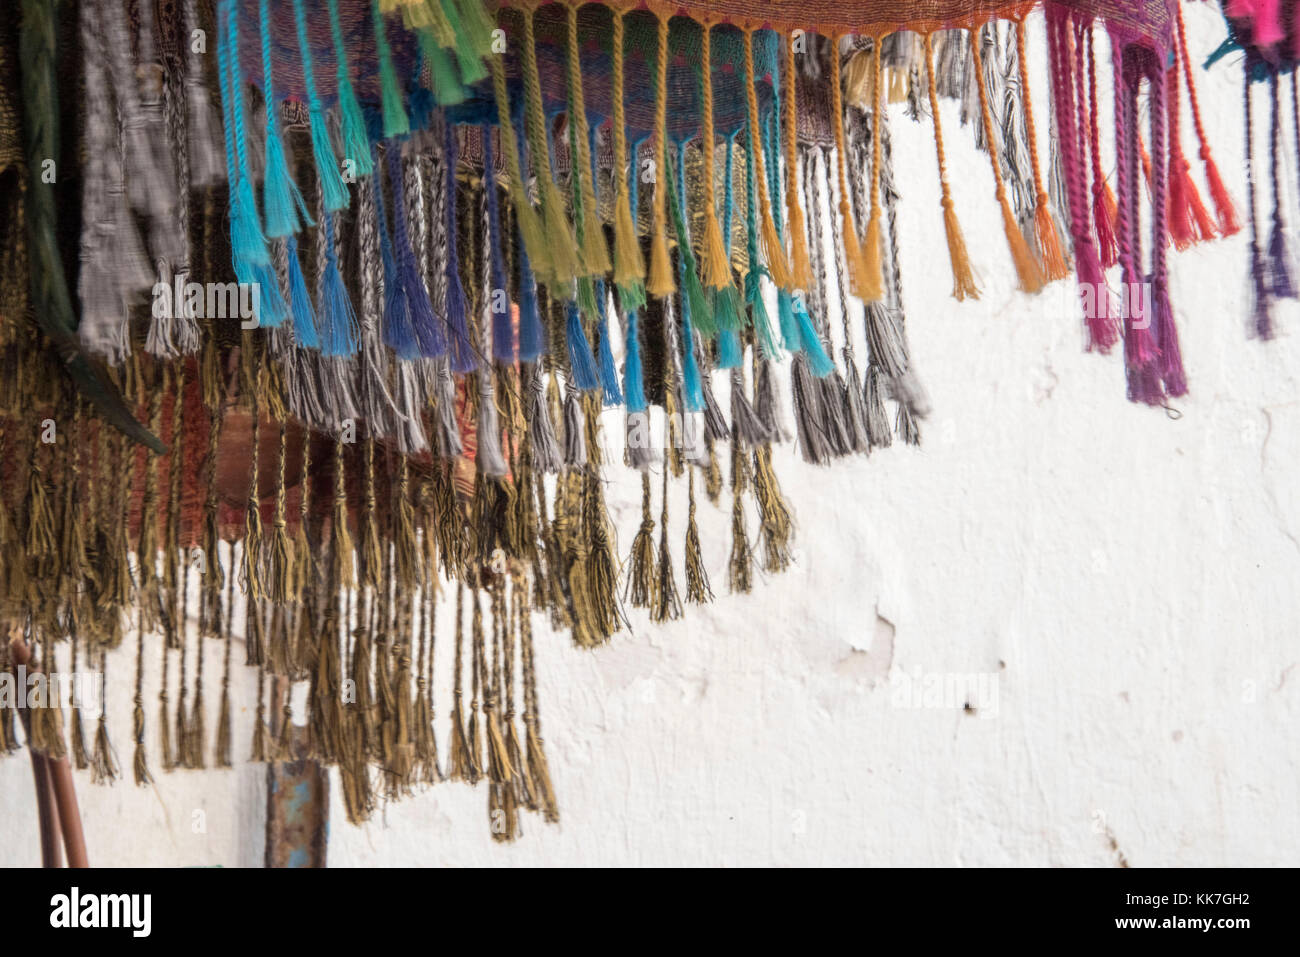 fringes on colorful textiles on sale in a Moroccan Market Stock Photo